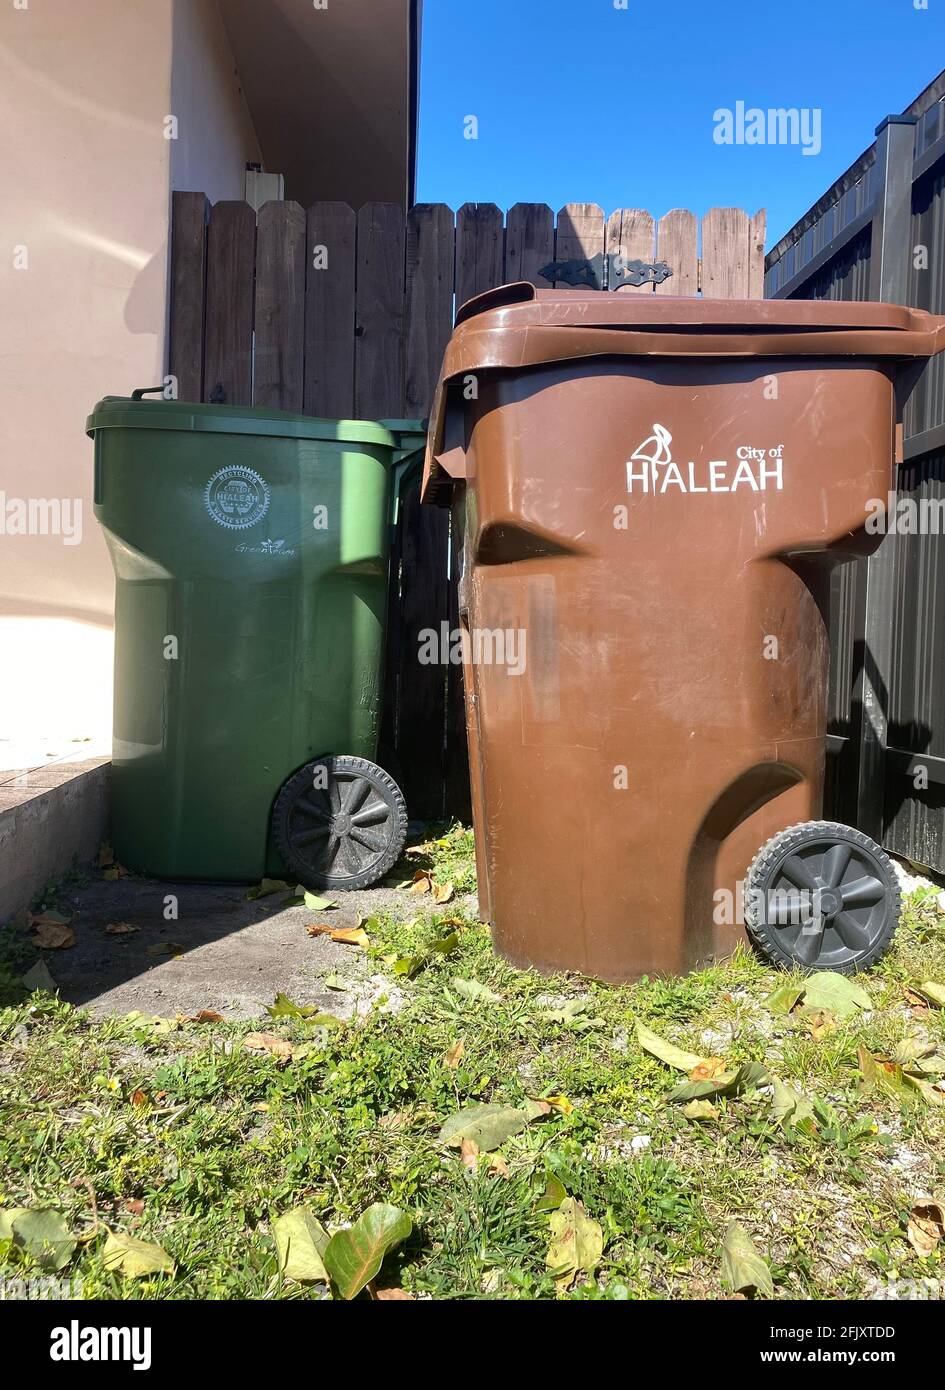 Garbage bin from The City of Hialeah near a residential home in Miami Dade County. Stock Photo